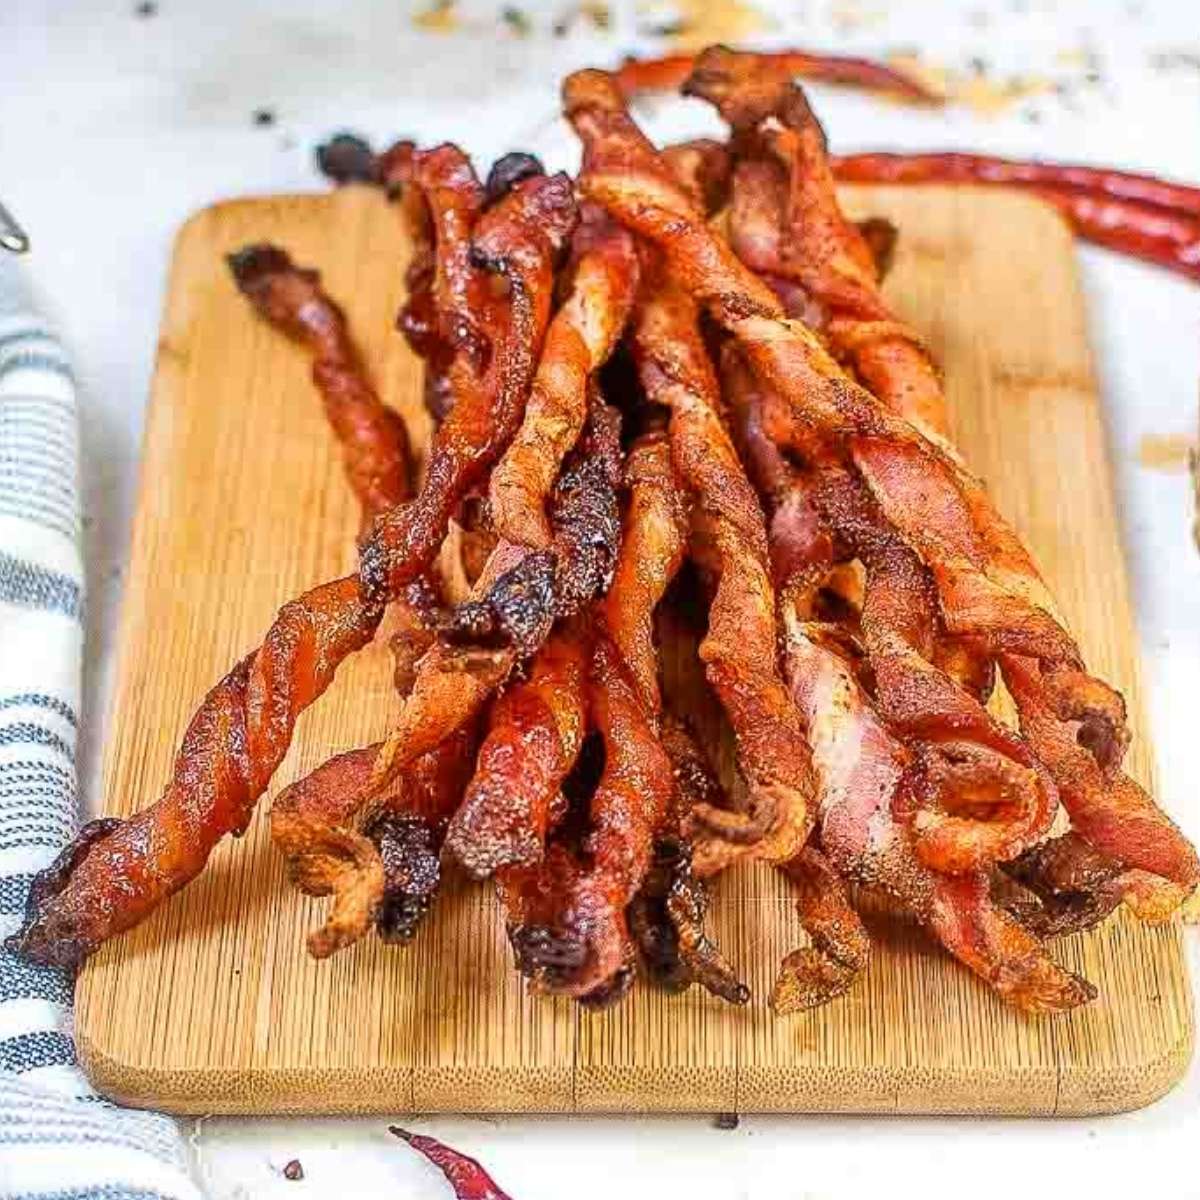 Air fryer twisted bacon piled on a wooden cutting board.